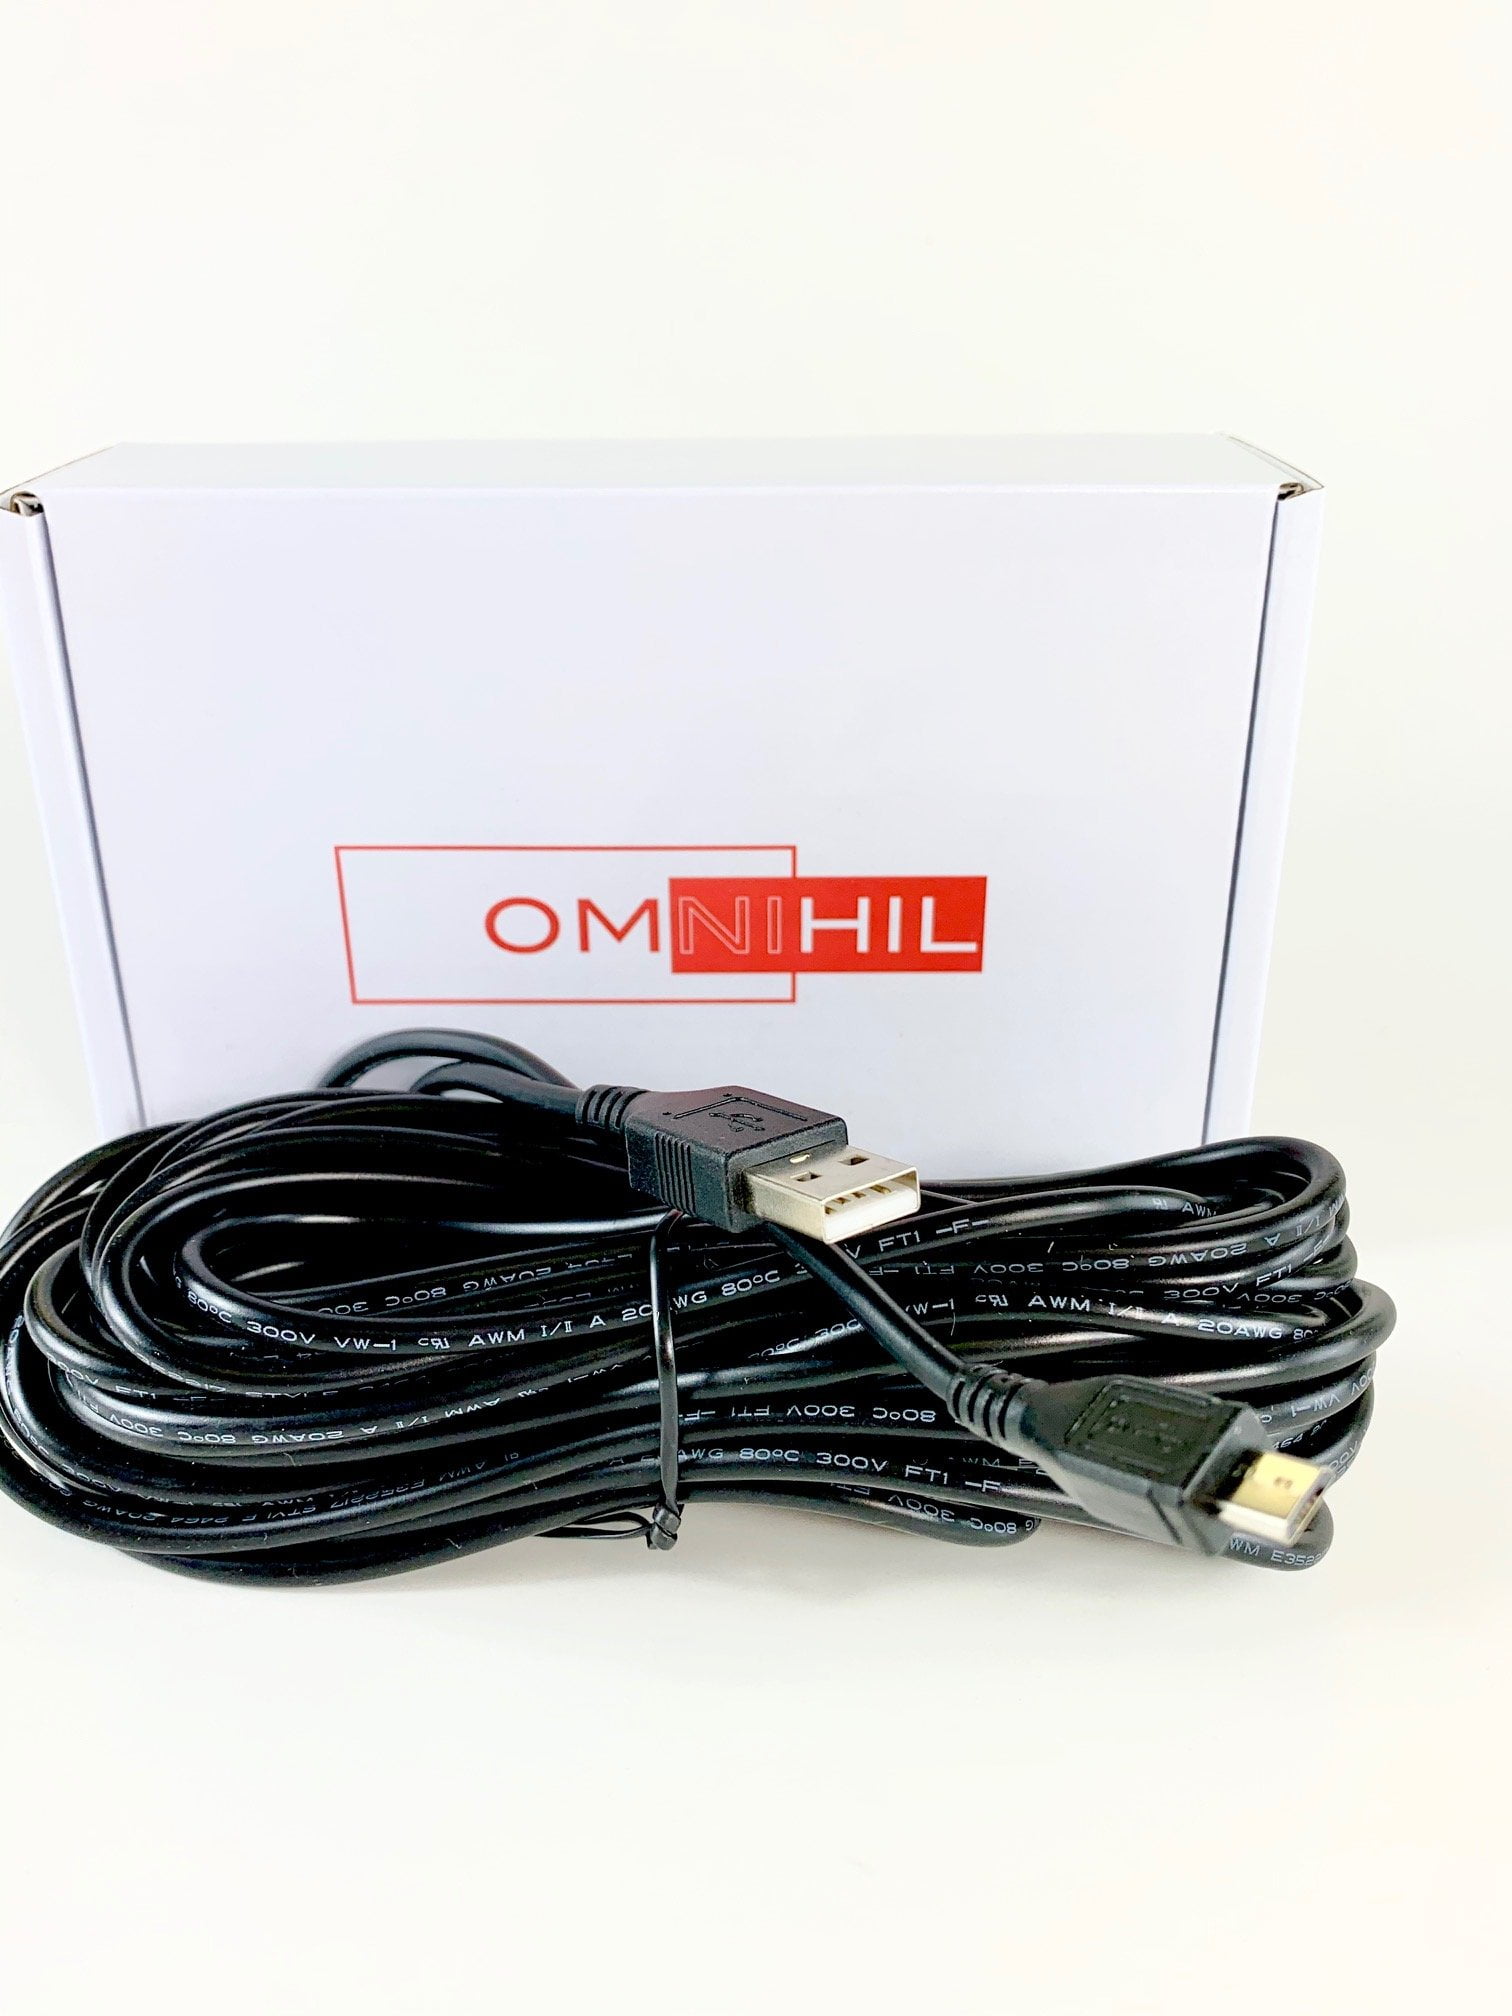 OMNIHIL 30 Feet Long High Speed USB 2.0 Cable Compatible with DEWALT DXFRS300 1W Walkie Talkies